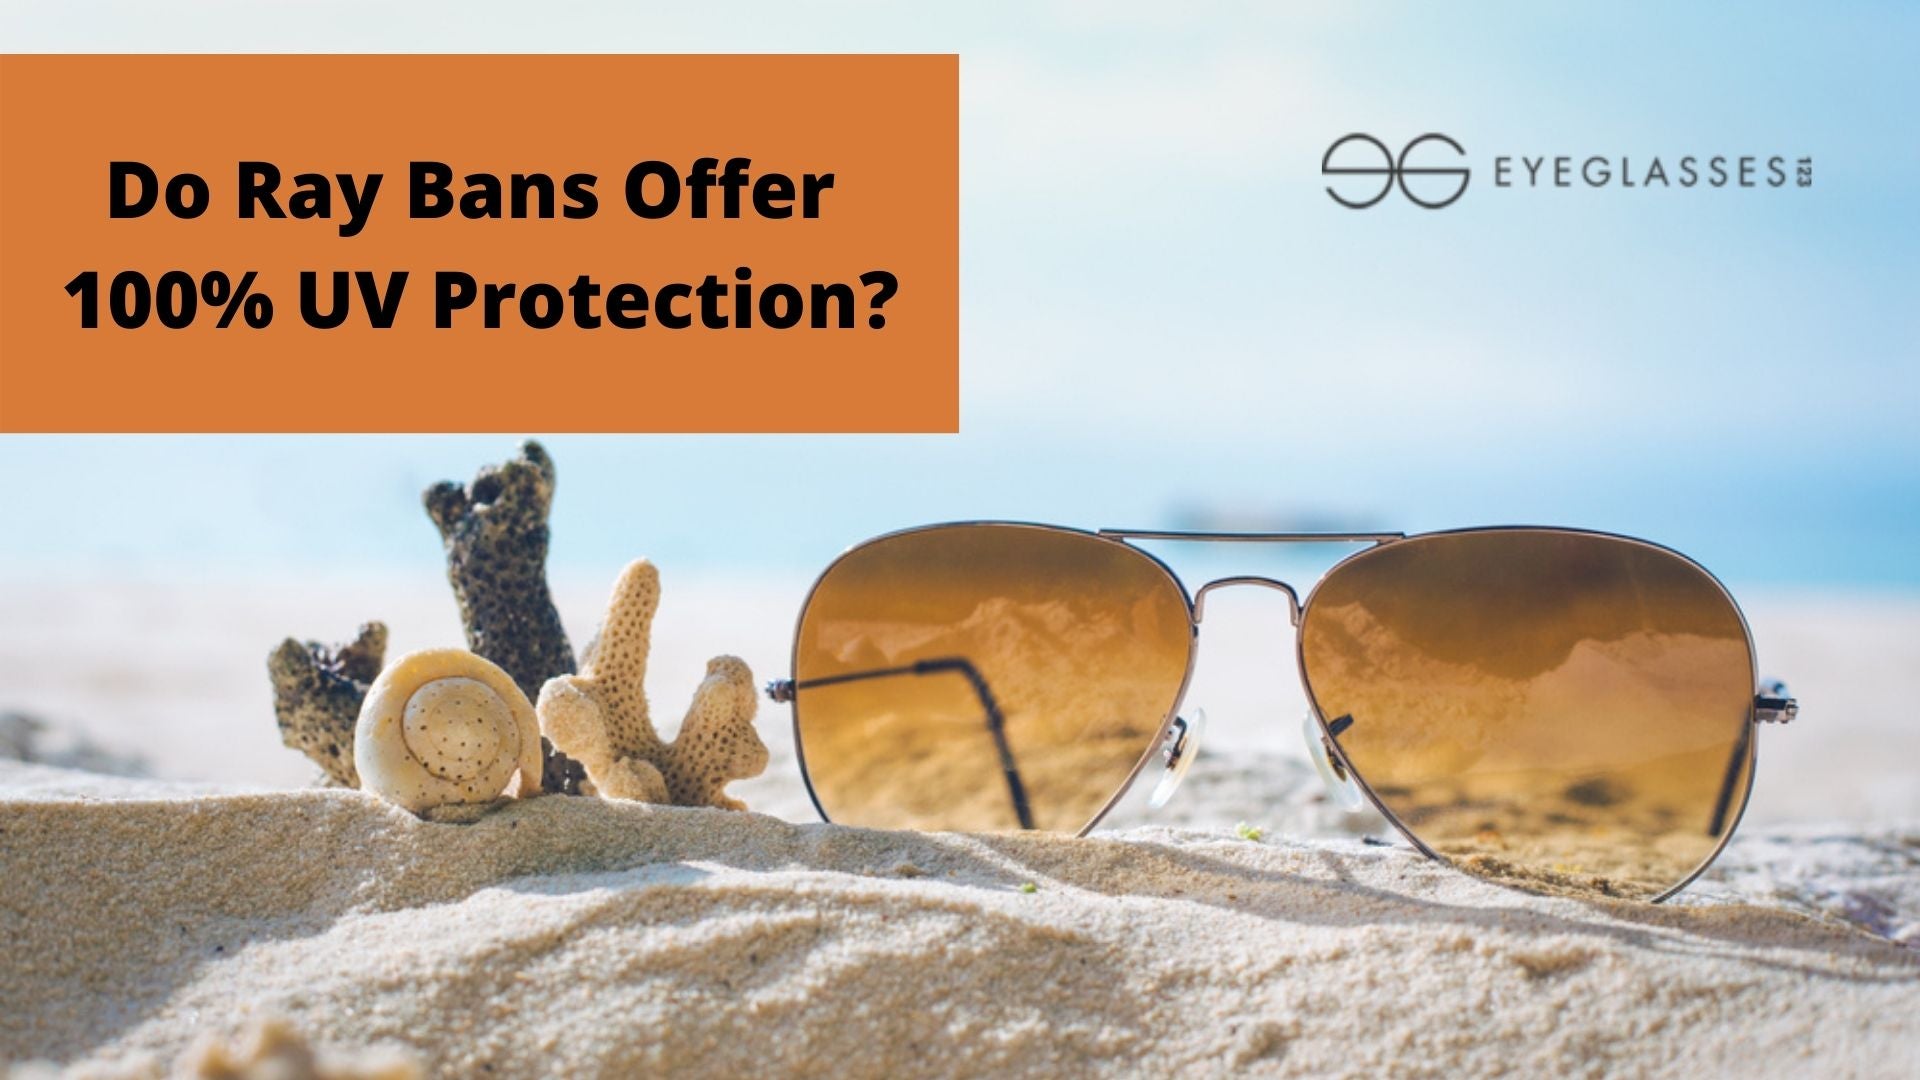 Do Ray Bans Offer 100% UV Protection